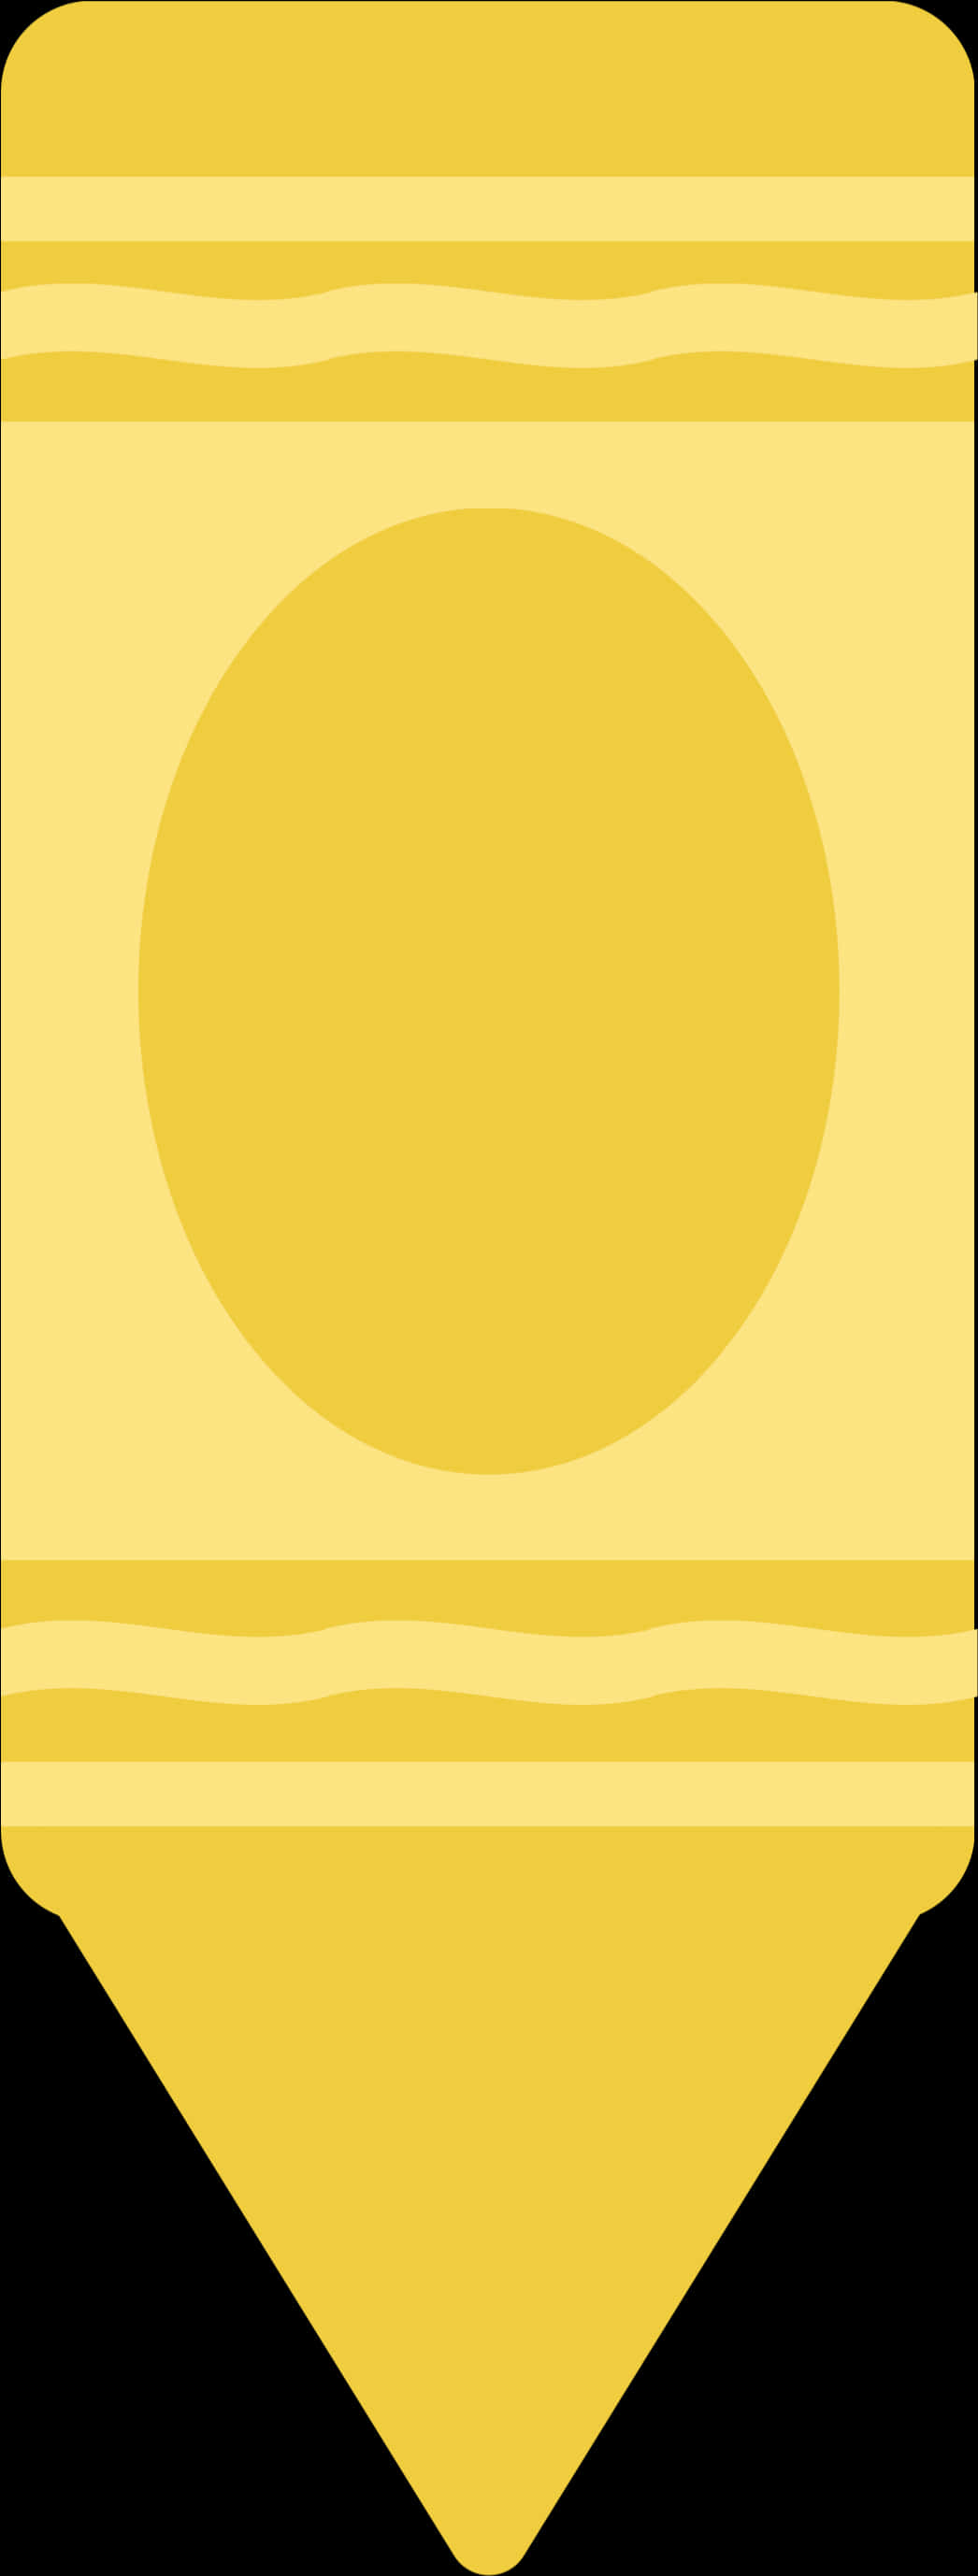 A Yellow Sun And Waves